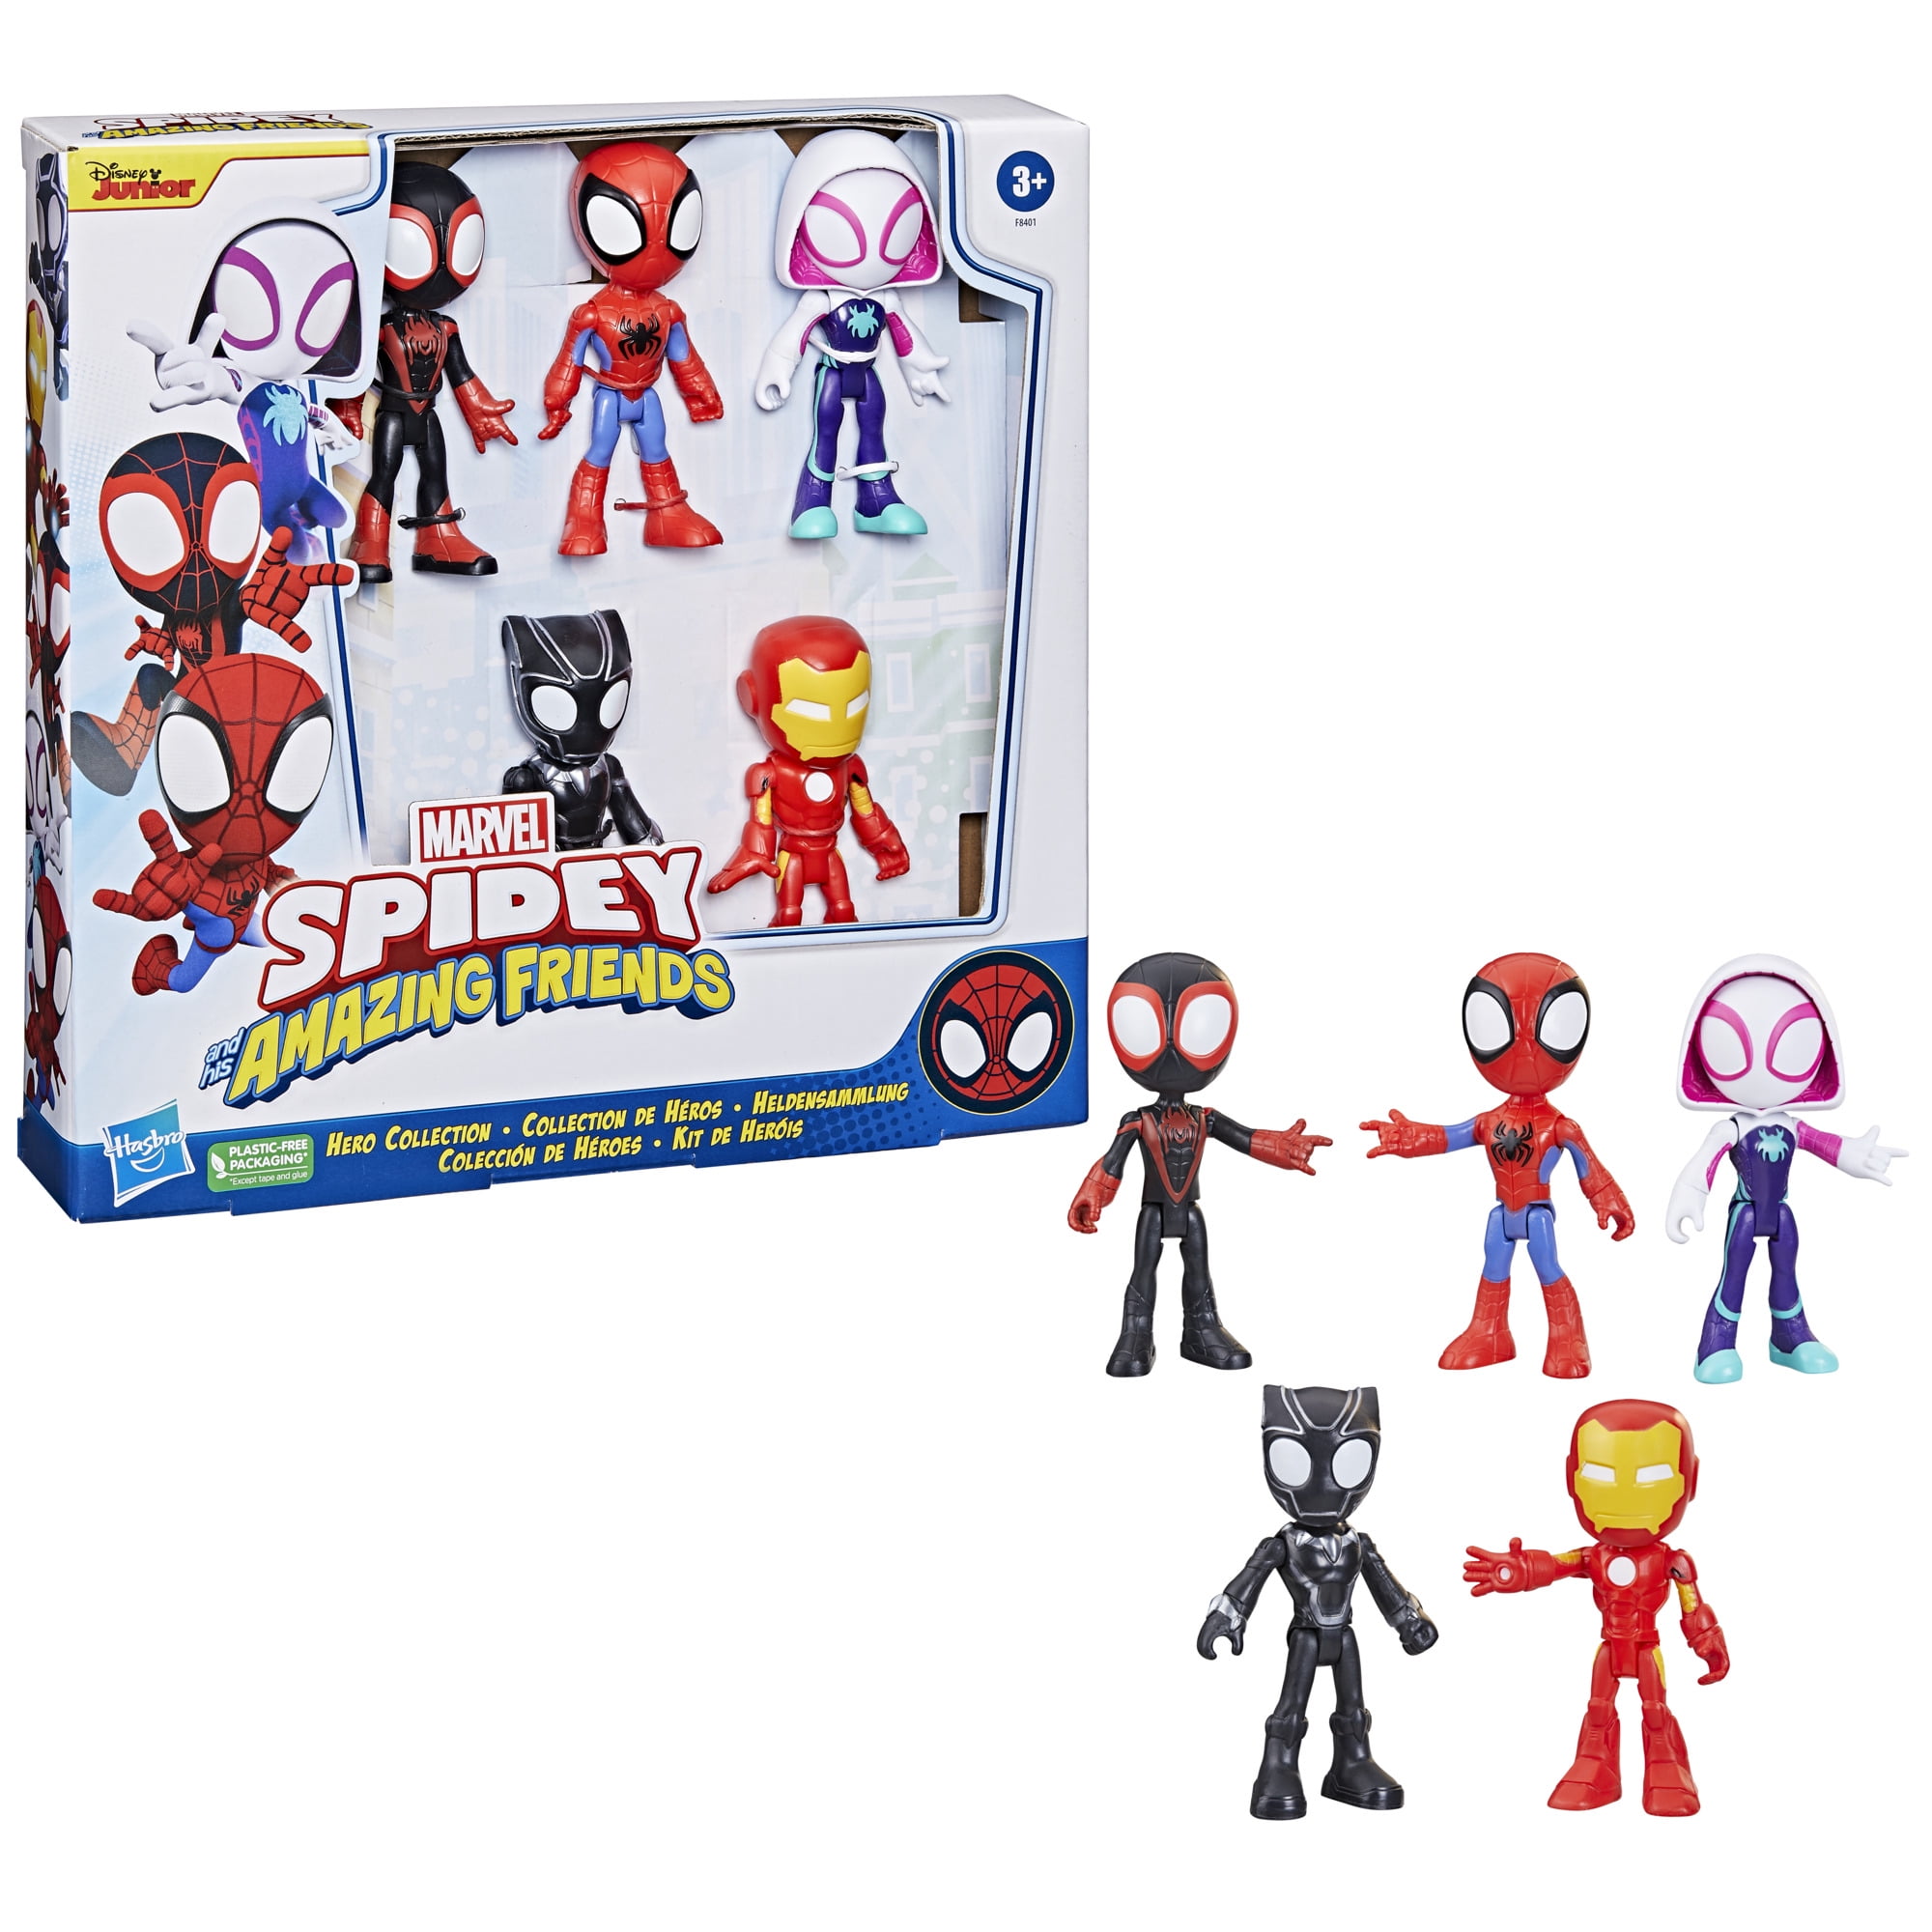  Hasbro Marvel Spidey and His Amazing Friends Supersized Spidey  Action Figure, Preschool Superhero Toy for Kids Ages 3 and Up Multicolor  Other_Toys : Toys & Games